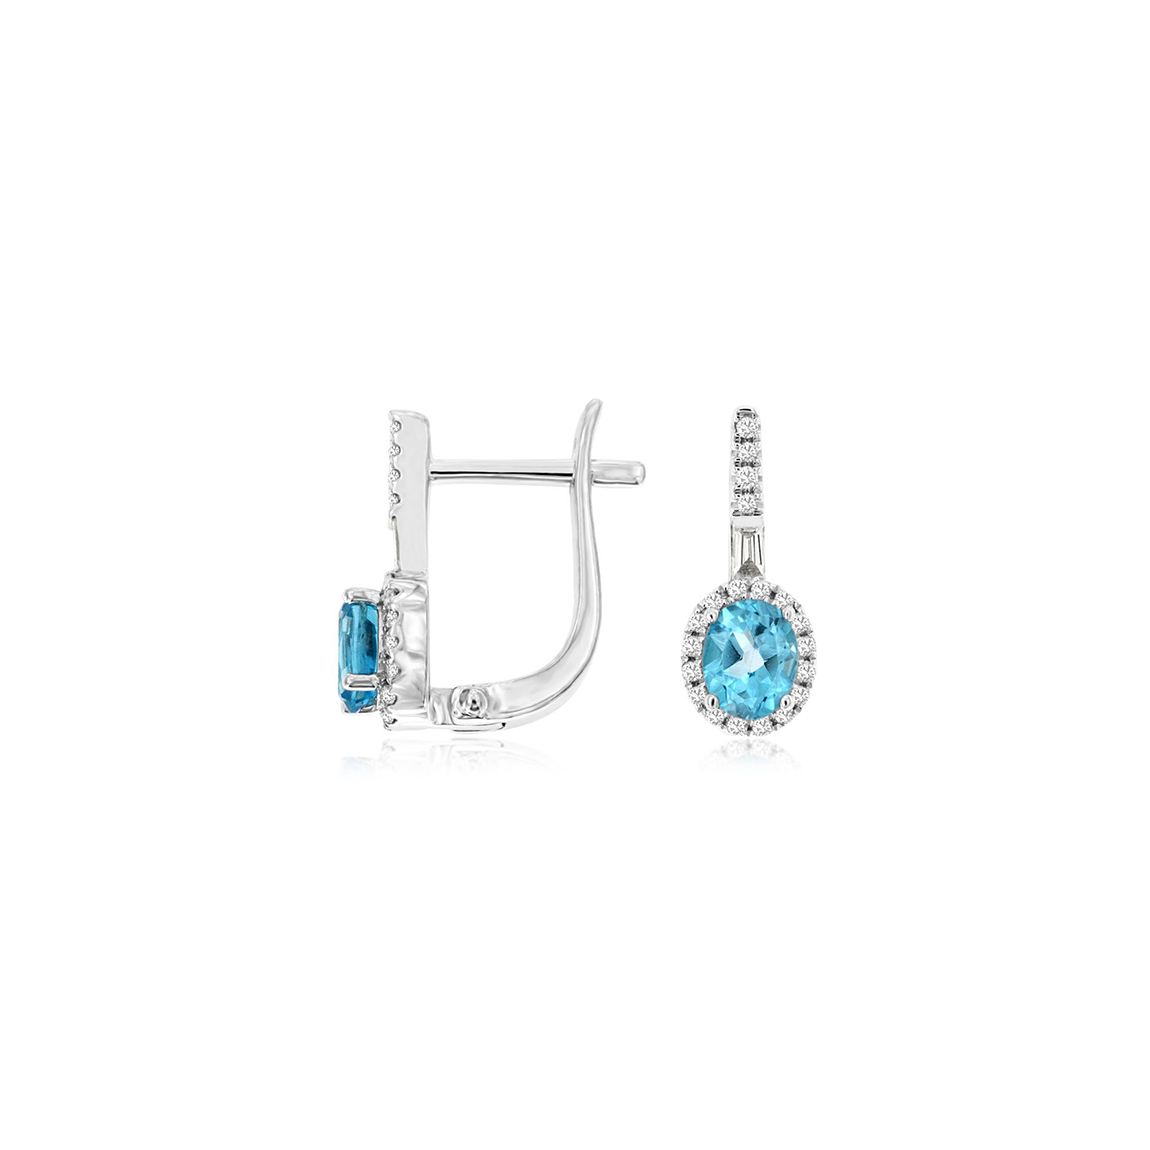 Sabel Collection 14K White Gold Oval Blue Topaz and Diamond Earrings